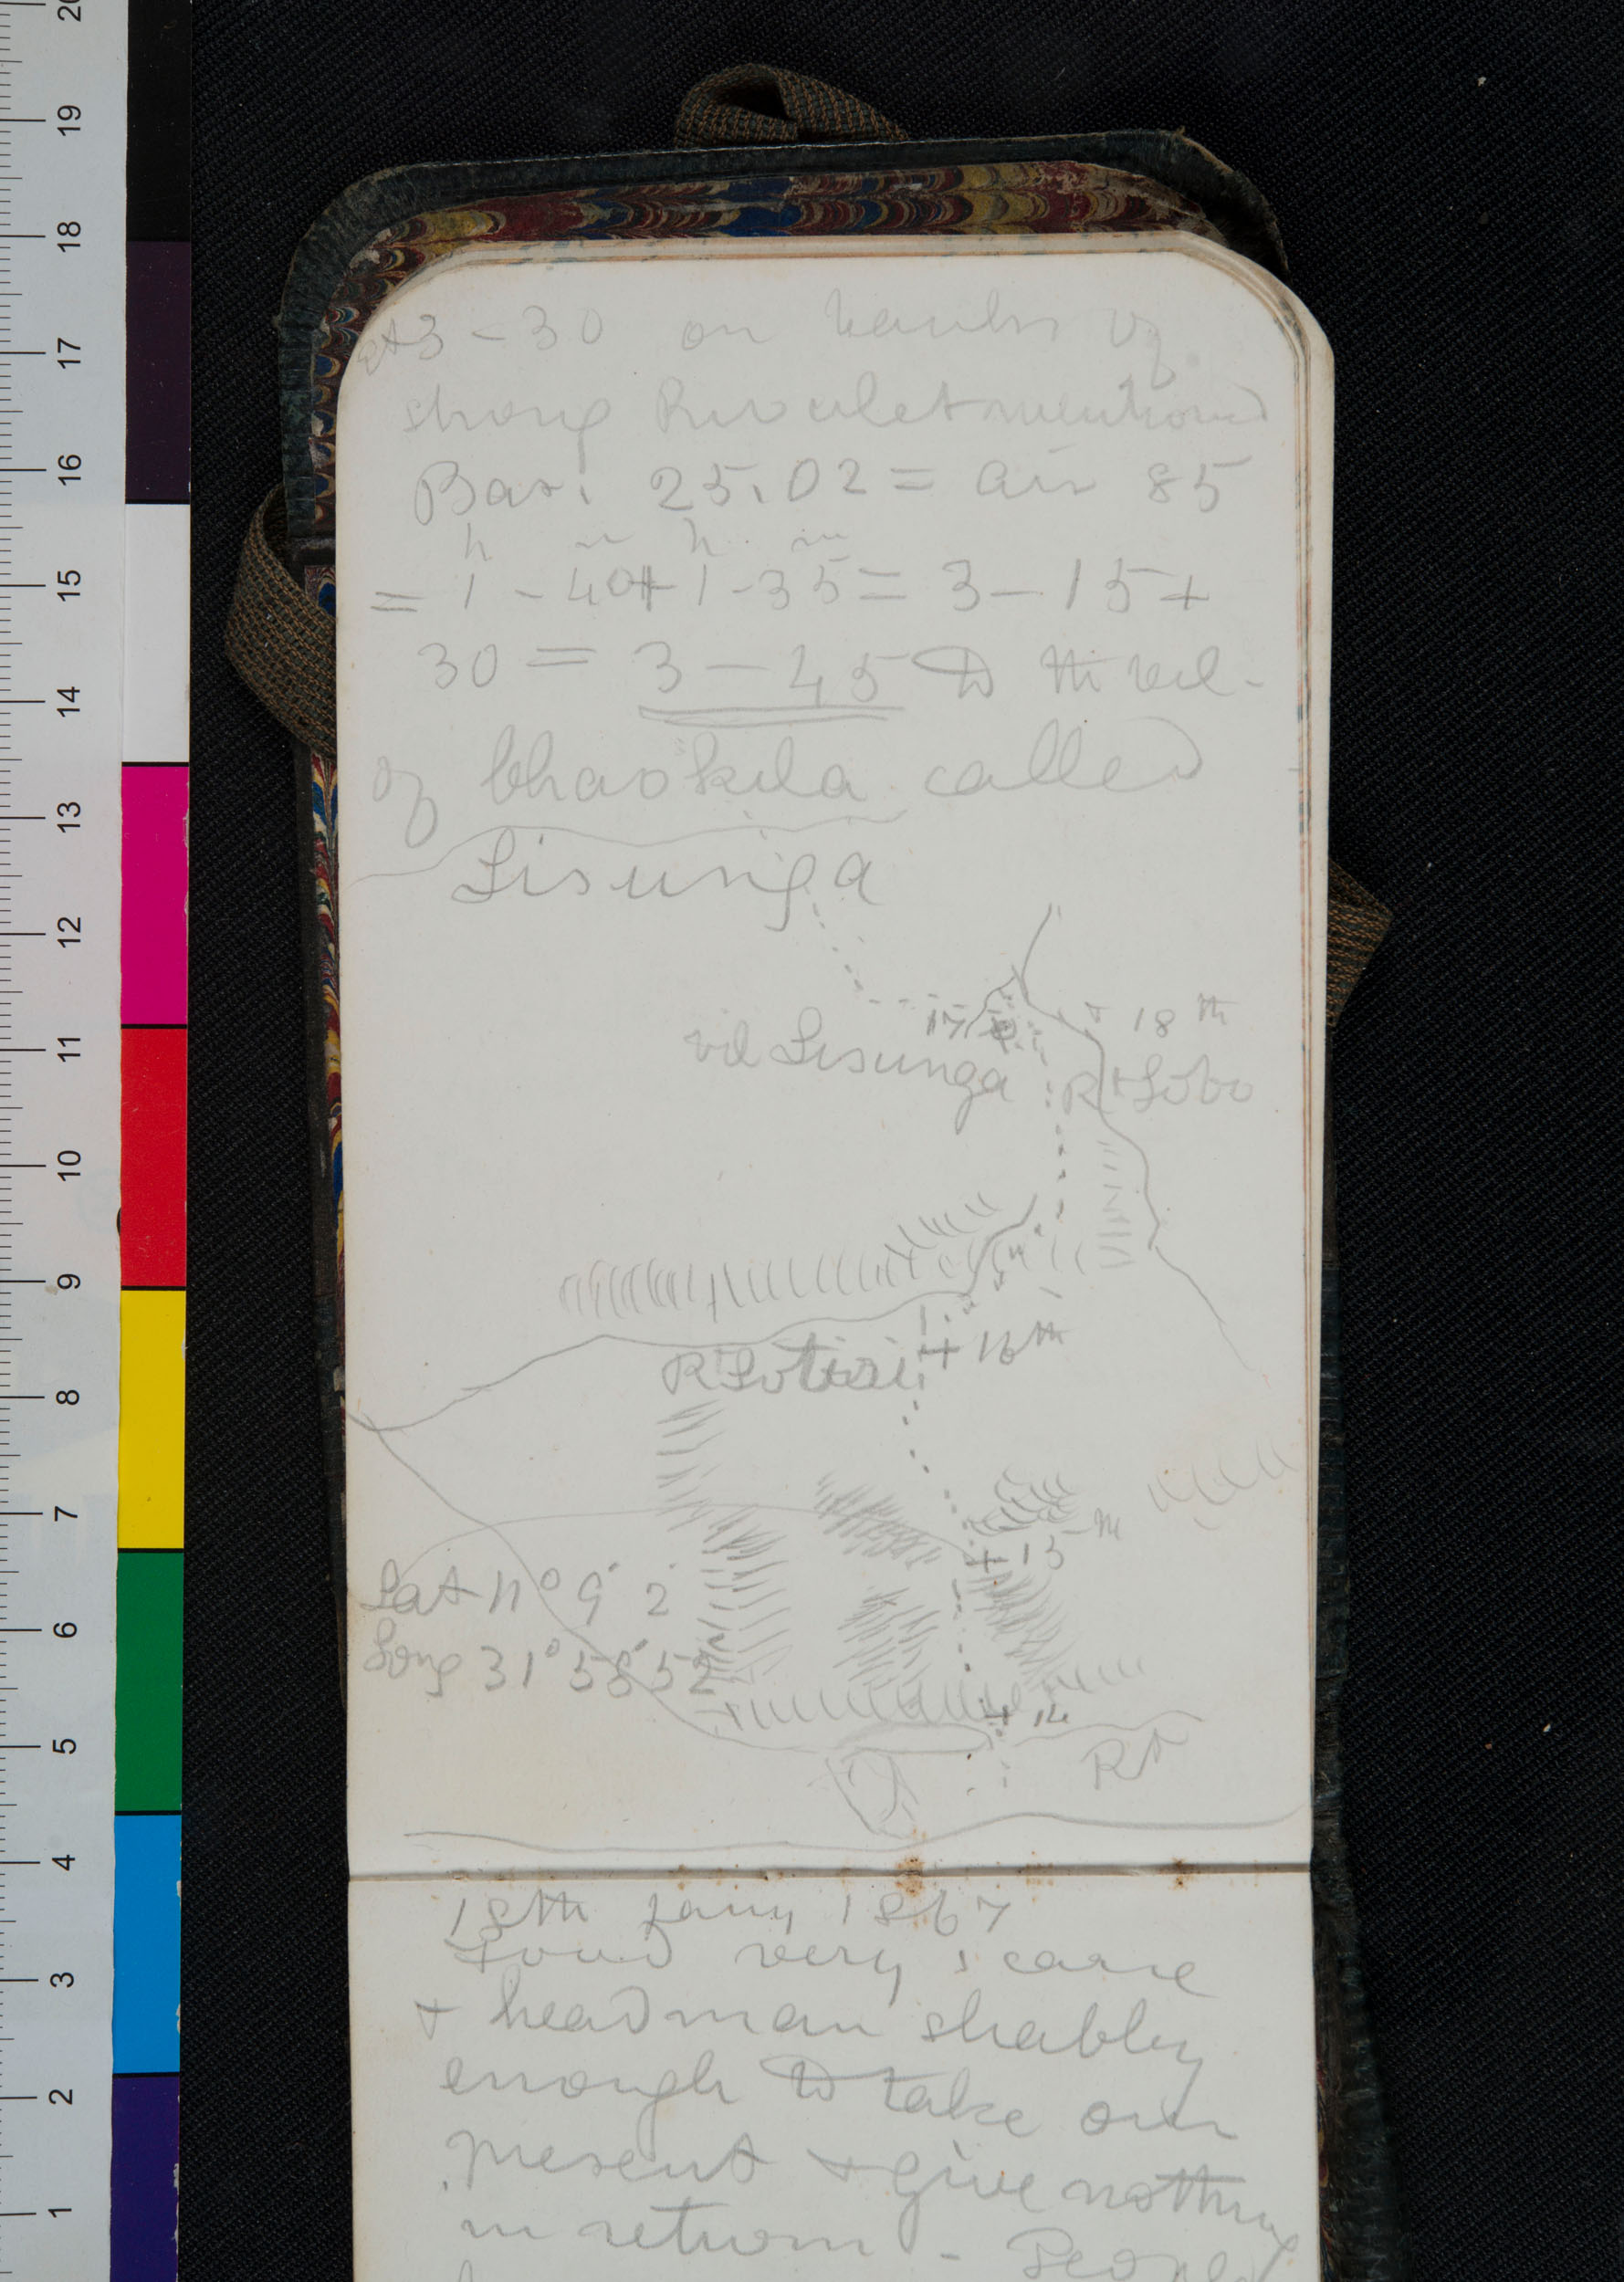 An image of a page of Field Diary VII (Livingstone 1866f:[57]). Copyright David Livingstone Centre. Creative Commons Attribution-NonCommercial 3.0 Unported (https://creativecommons.org/licenses/by-nc/3.0/).